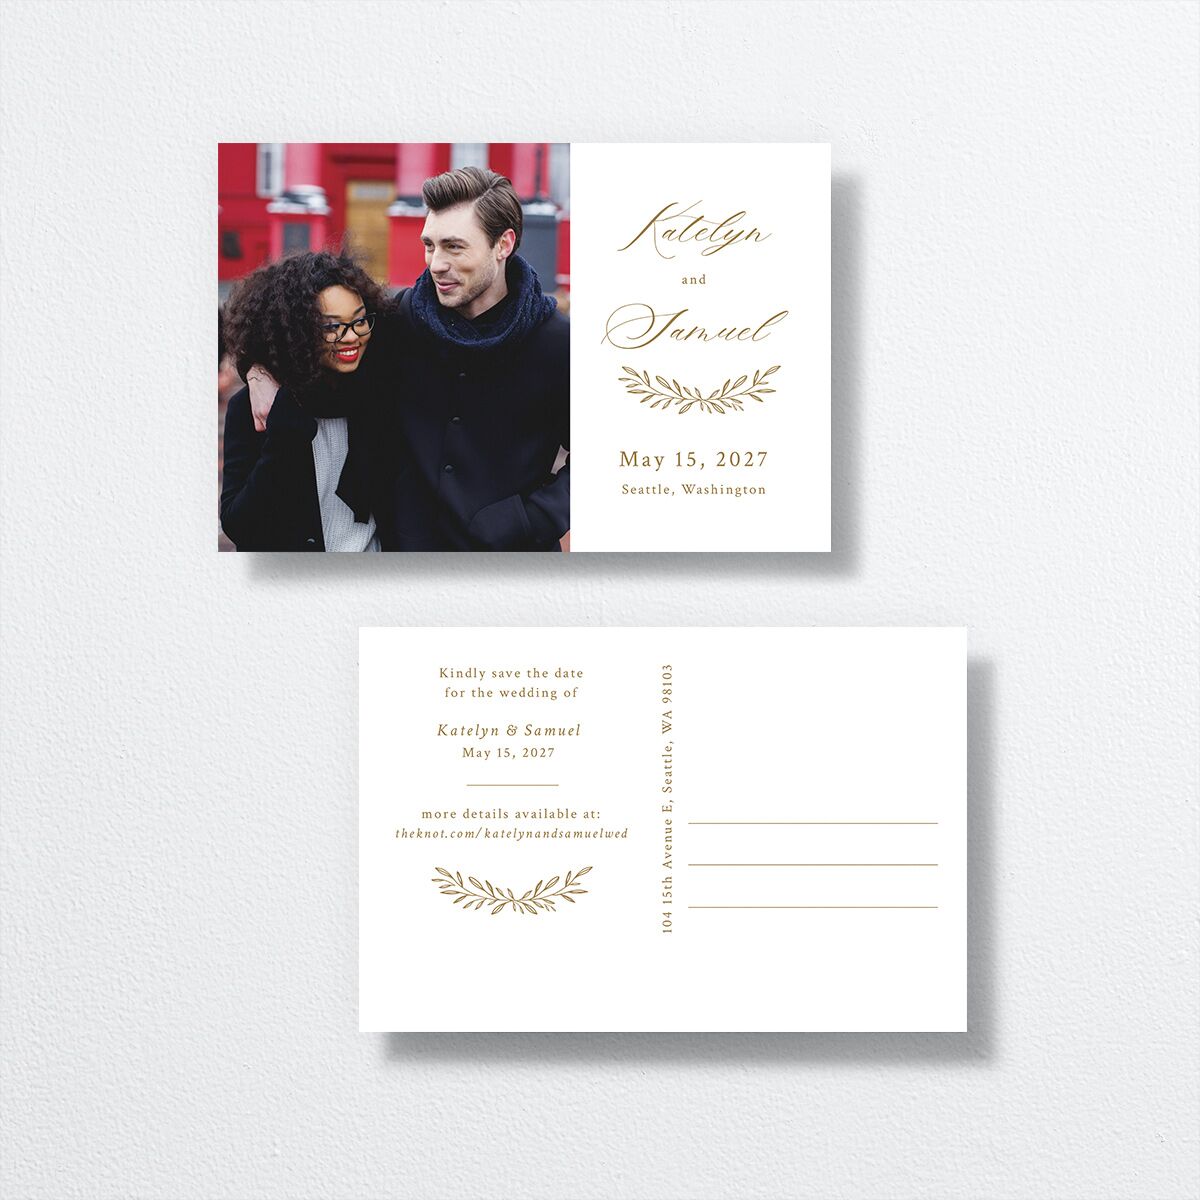 Monogram Wreath Save The Date Postcards front-and-back in gold